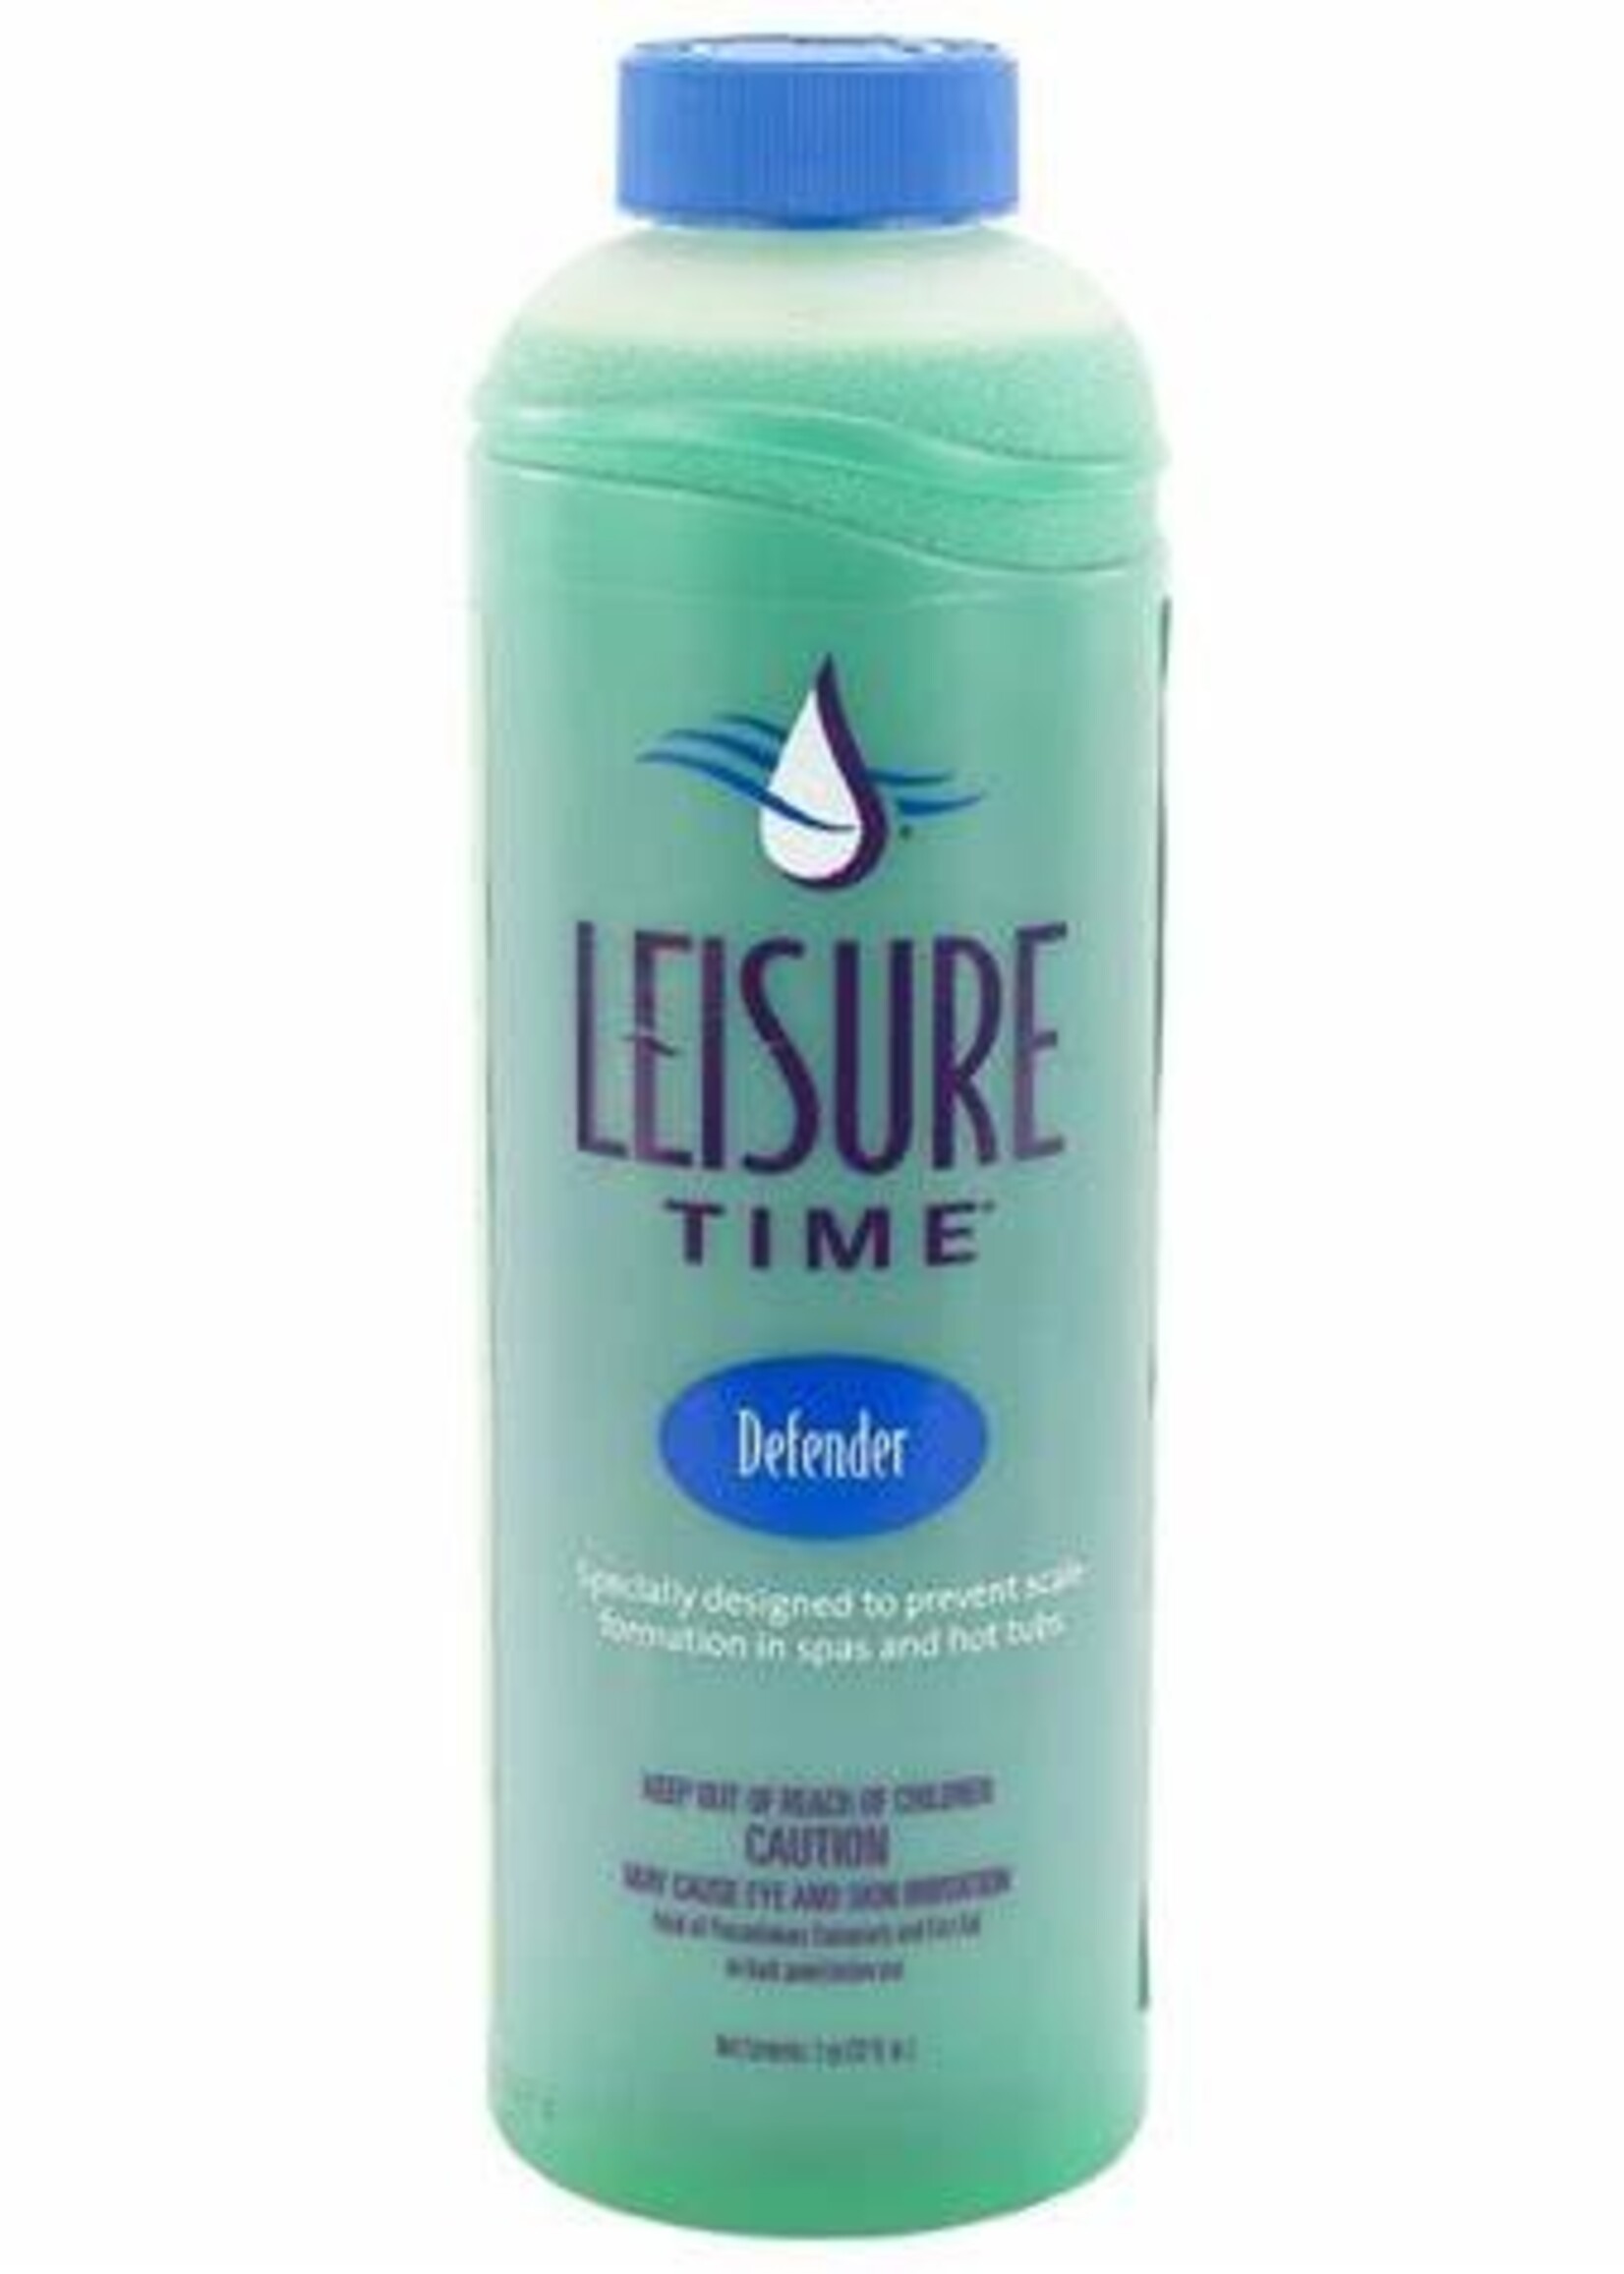 Leisure Time Defender (Leisure Time) 32 oz